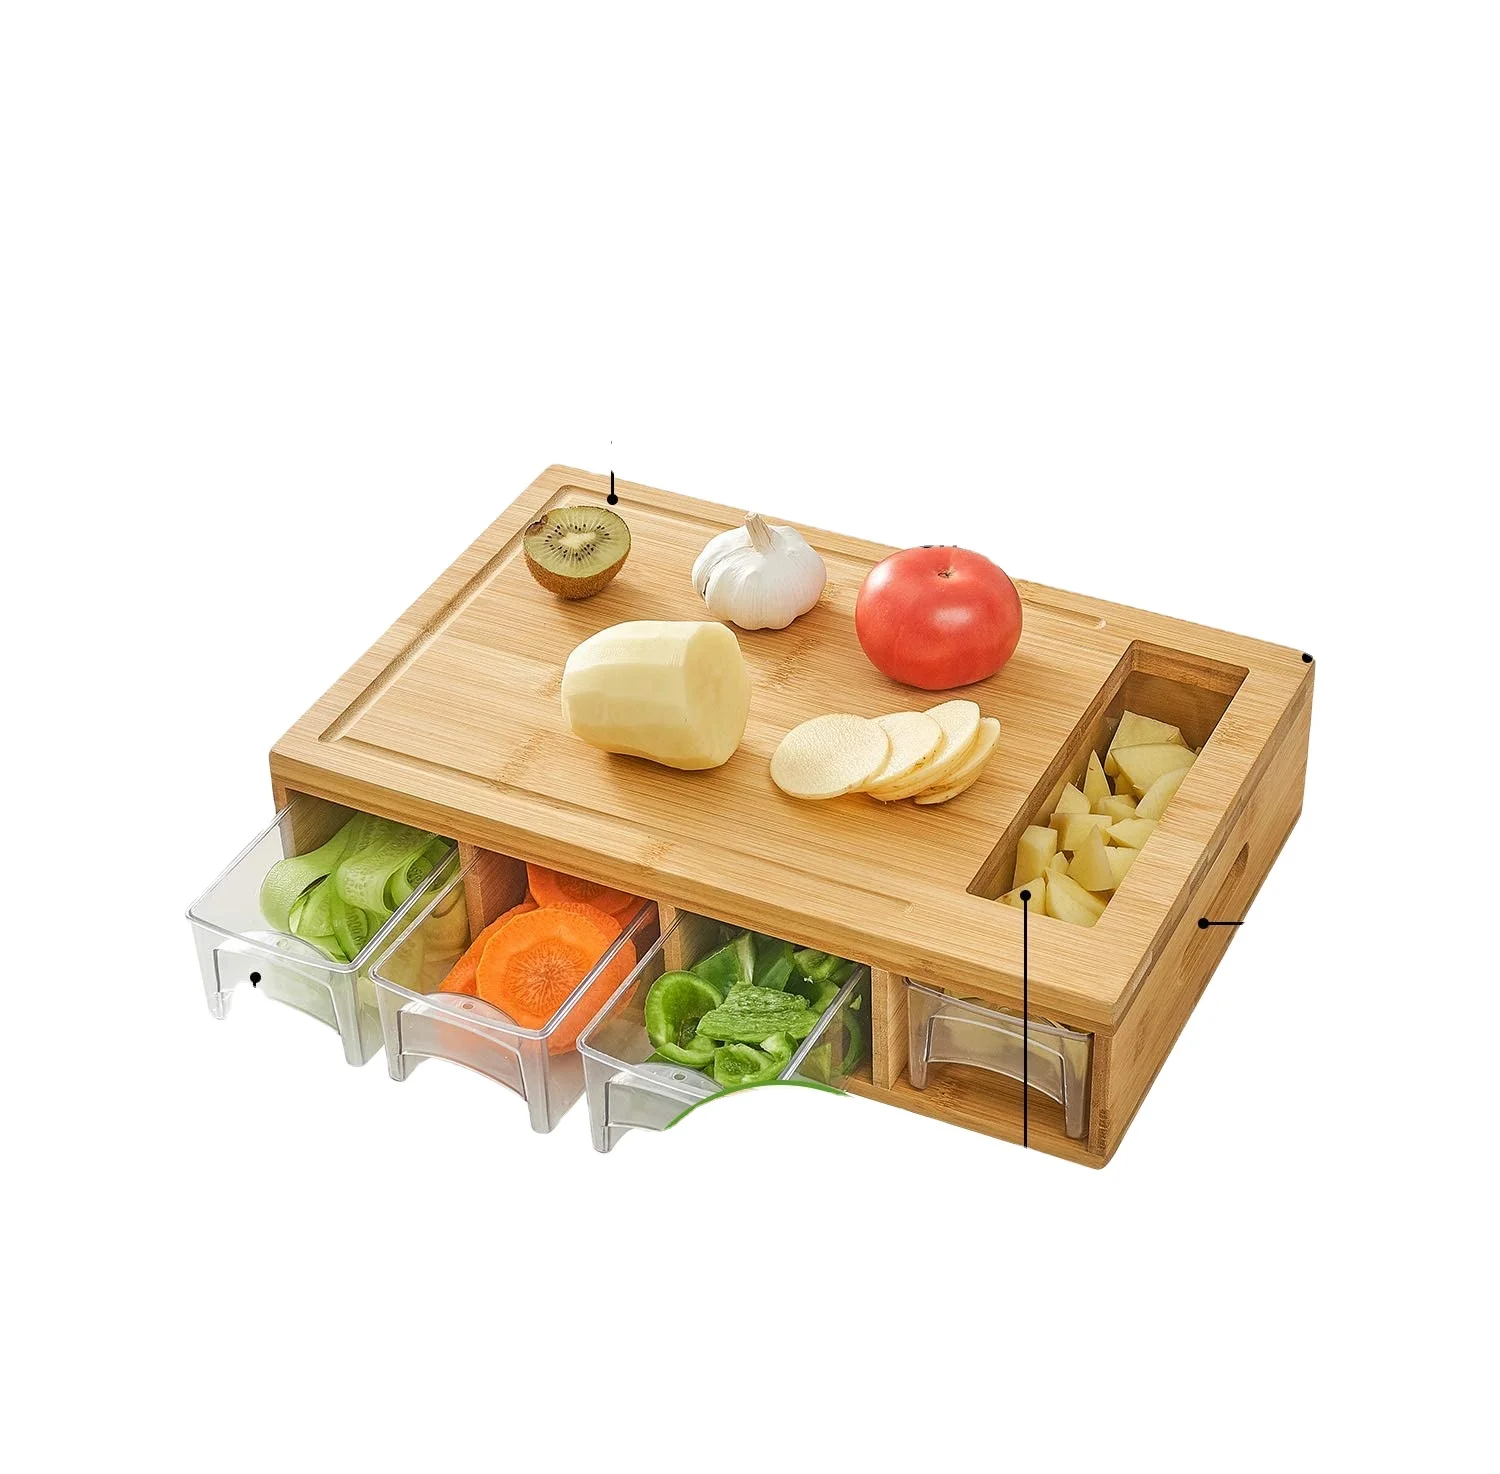 

Bamboo Cutting Board Chopping Blocks With Trays Wood Butcher Block With 4 Drawers containers, Natural